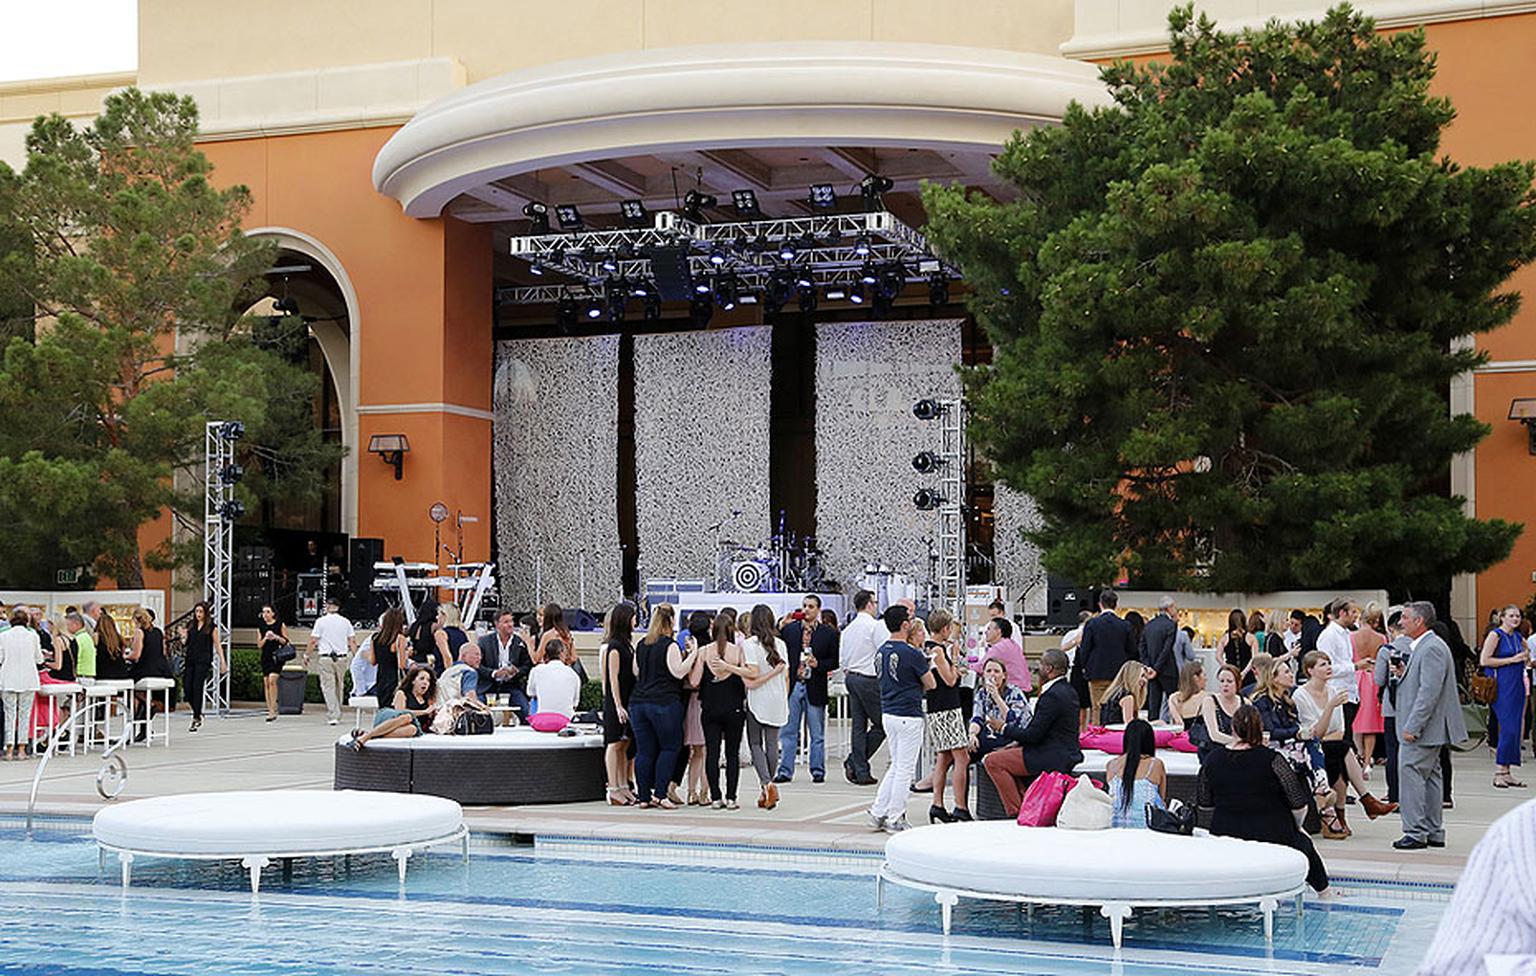 The Couture Show Las Vegas is America's most talked-about jewelry show, showcasing the most creative and original gems from around the world, and the most glamorous also, with a welcome pool party on the first night.